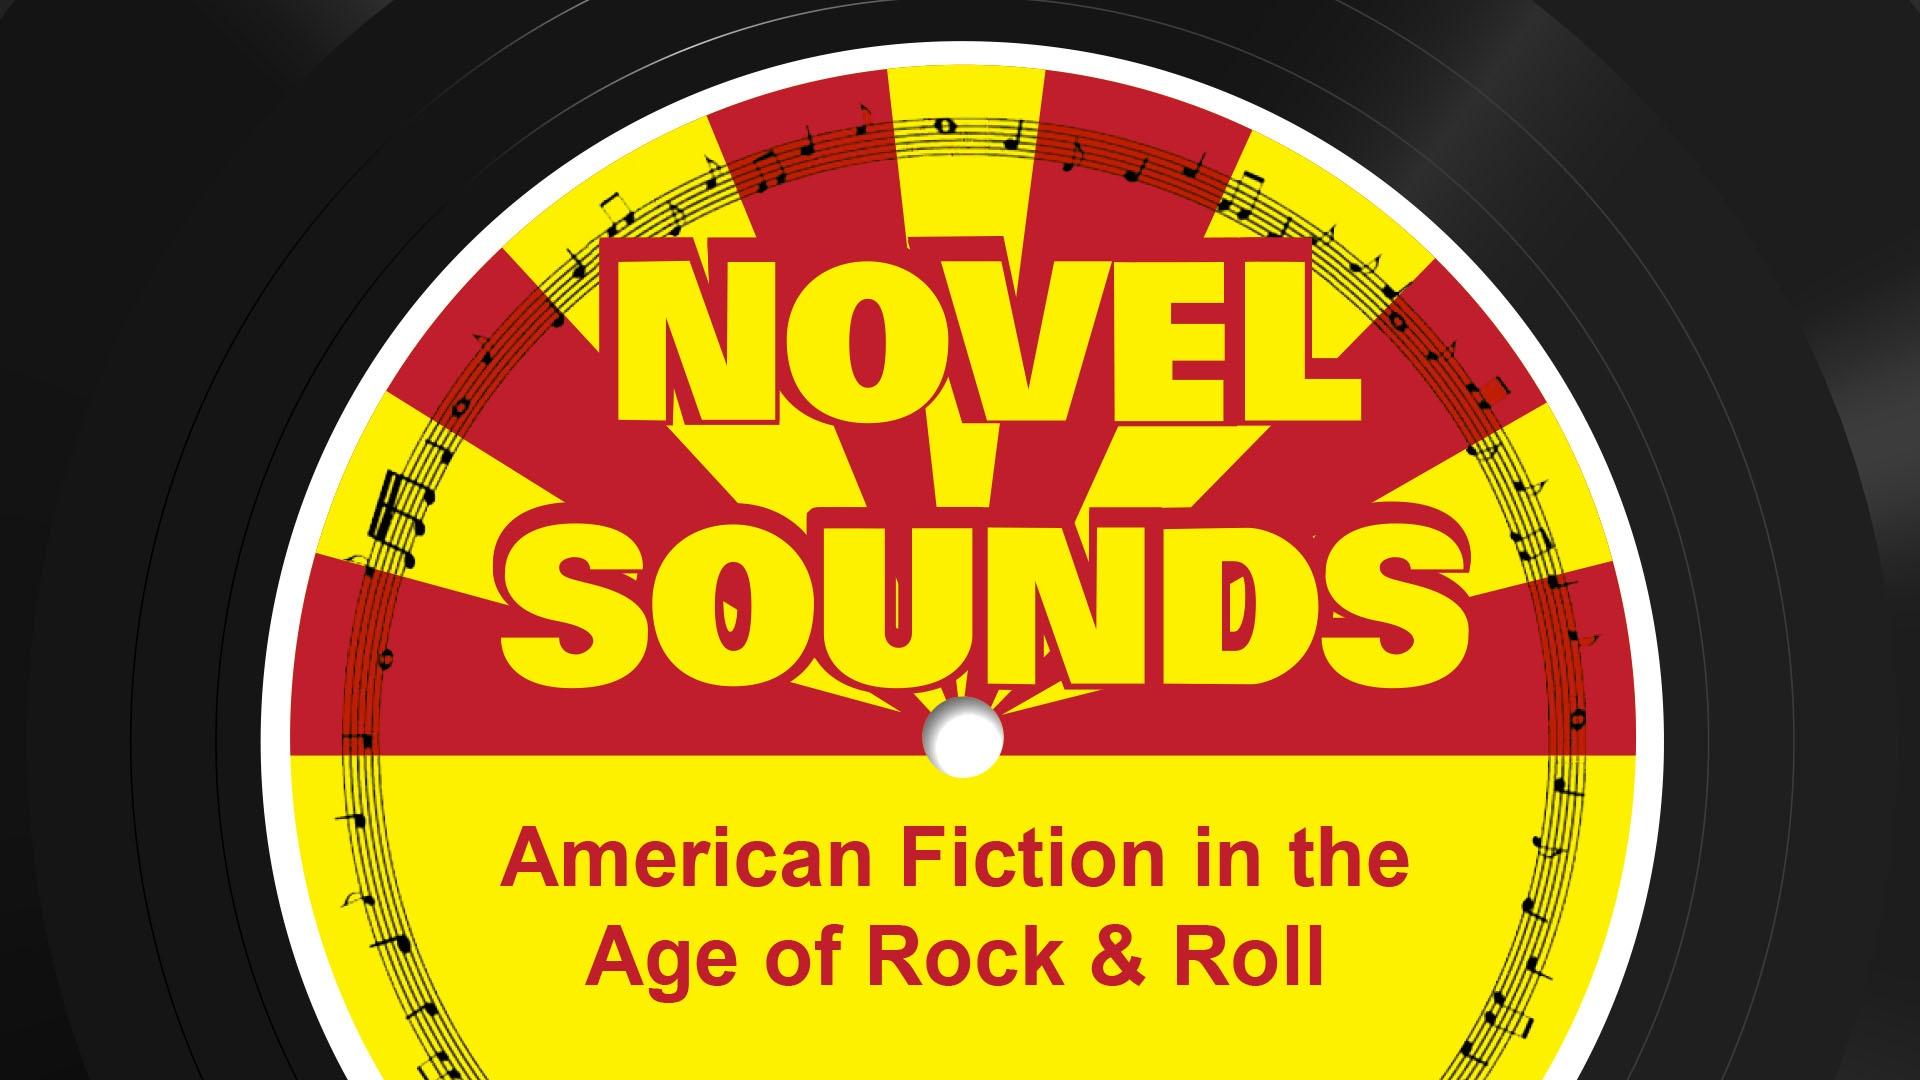 NOVEL SOUNDS: American Fiction in the Age of Rock & Roll